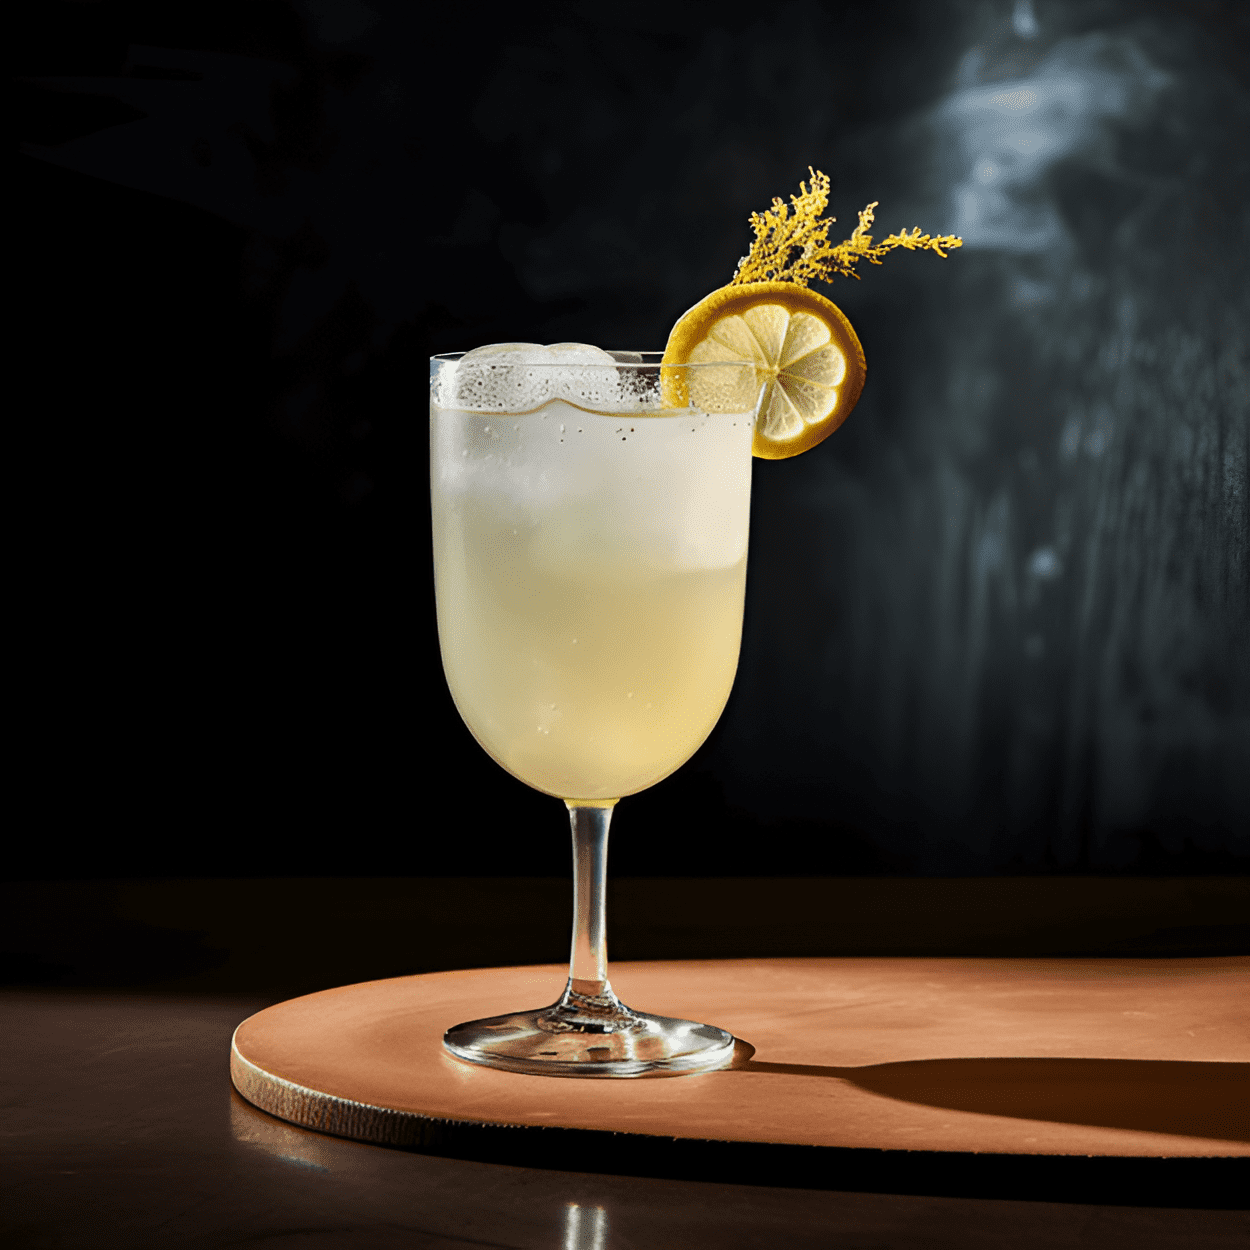 Gin Blossom Cocktail Recipe - The Gin Blossom is a refreshing, light, and slightly sweet cocktail. The floral notes of elderflower liqueur blend harmoniously with the botanicals of the gin, while the tonic water adds a touch of bitterness. The lemon juice brings a subtle tartness that balances the sweetness.